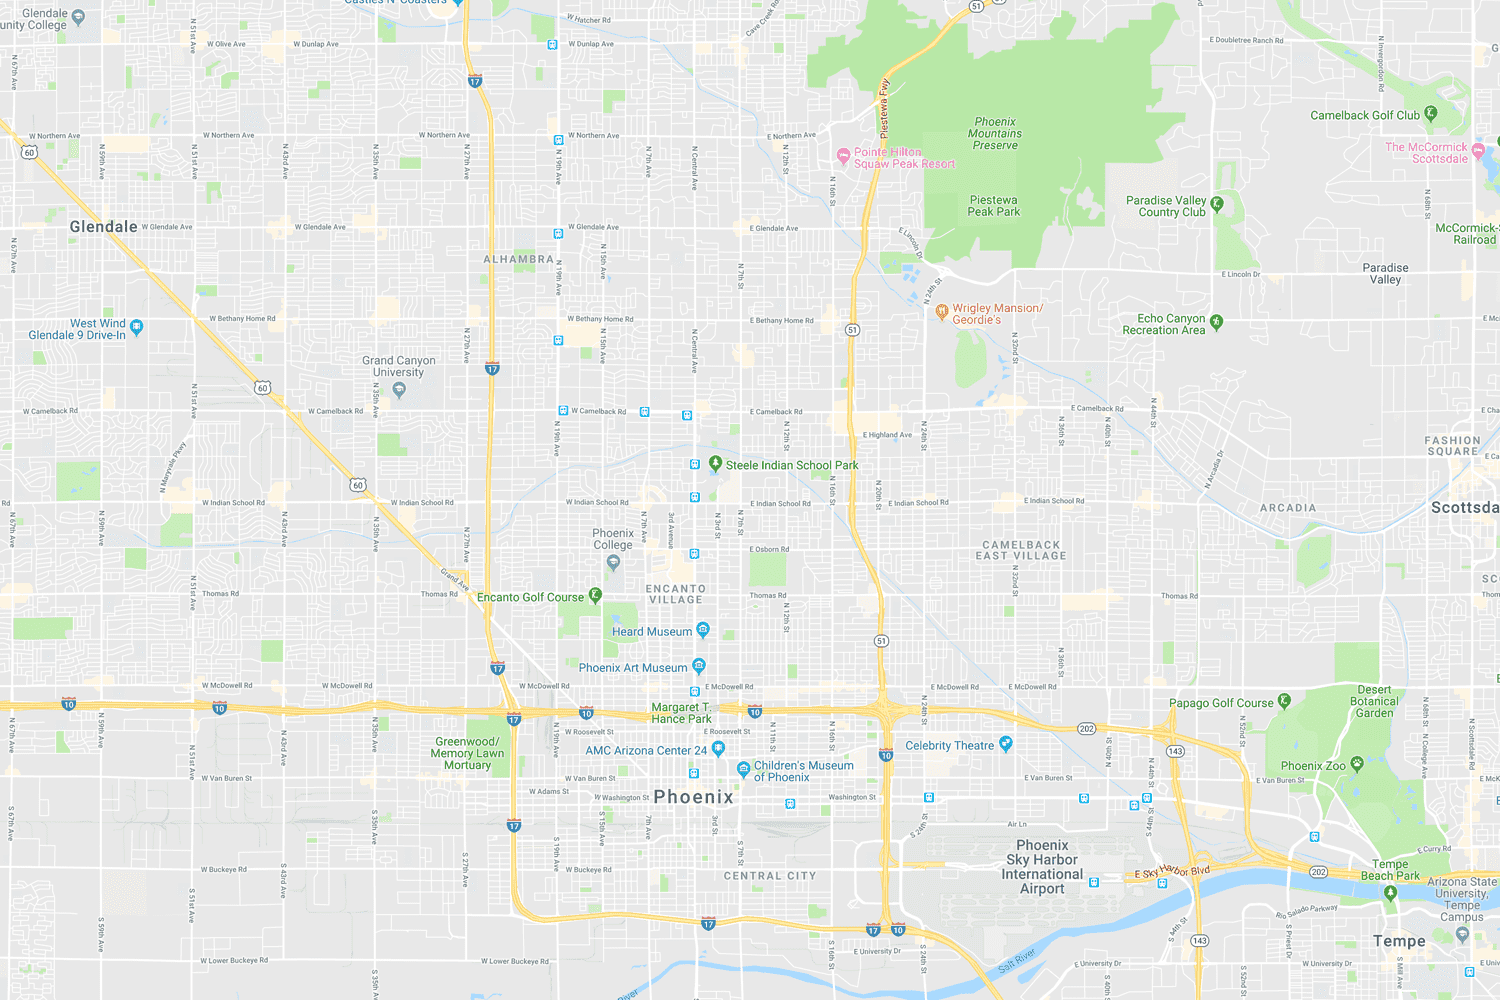 Map of Downtown Phoenix location